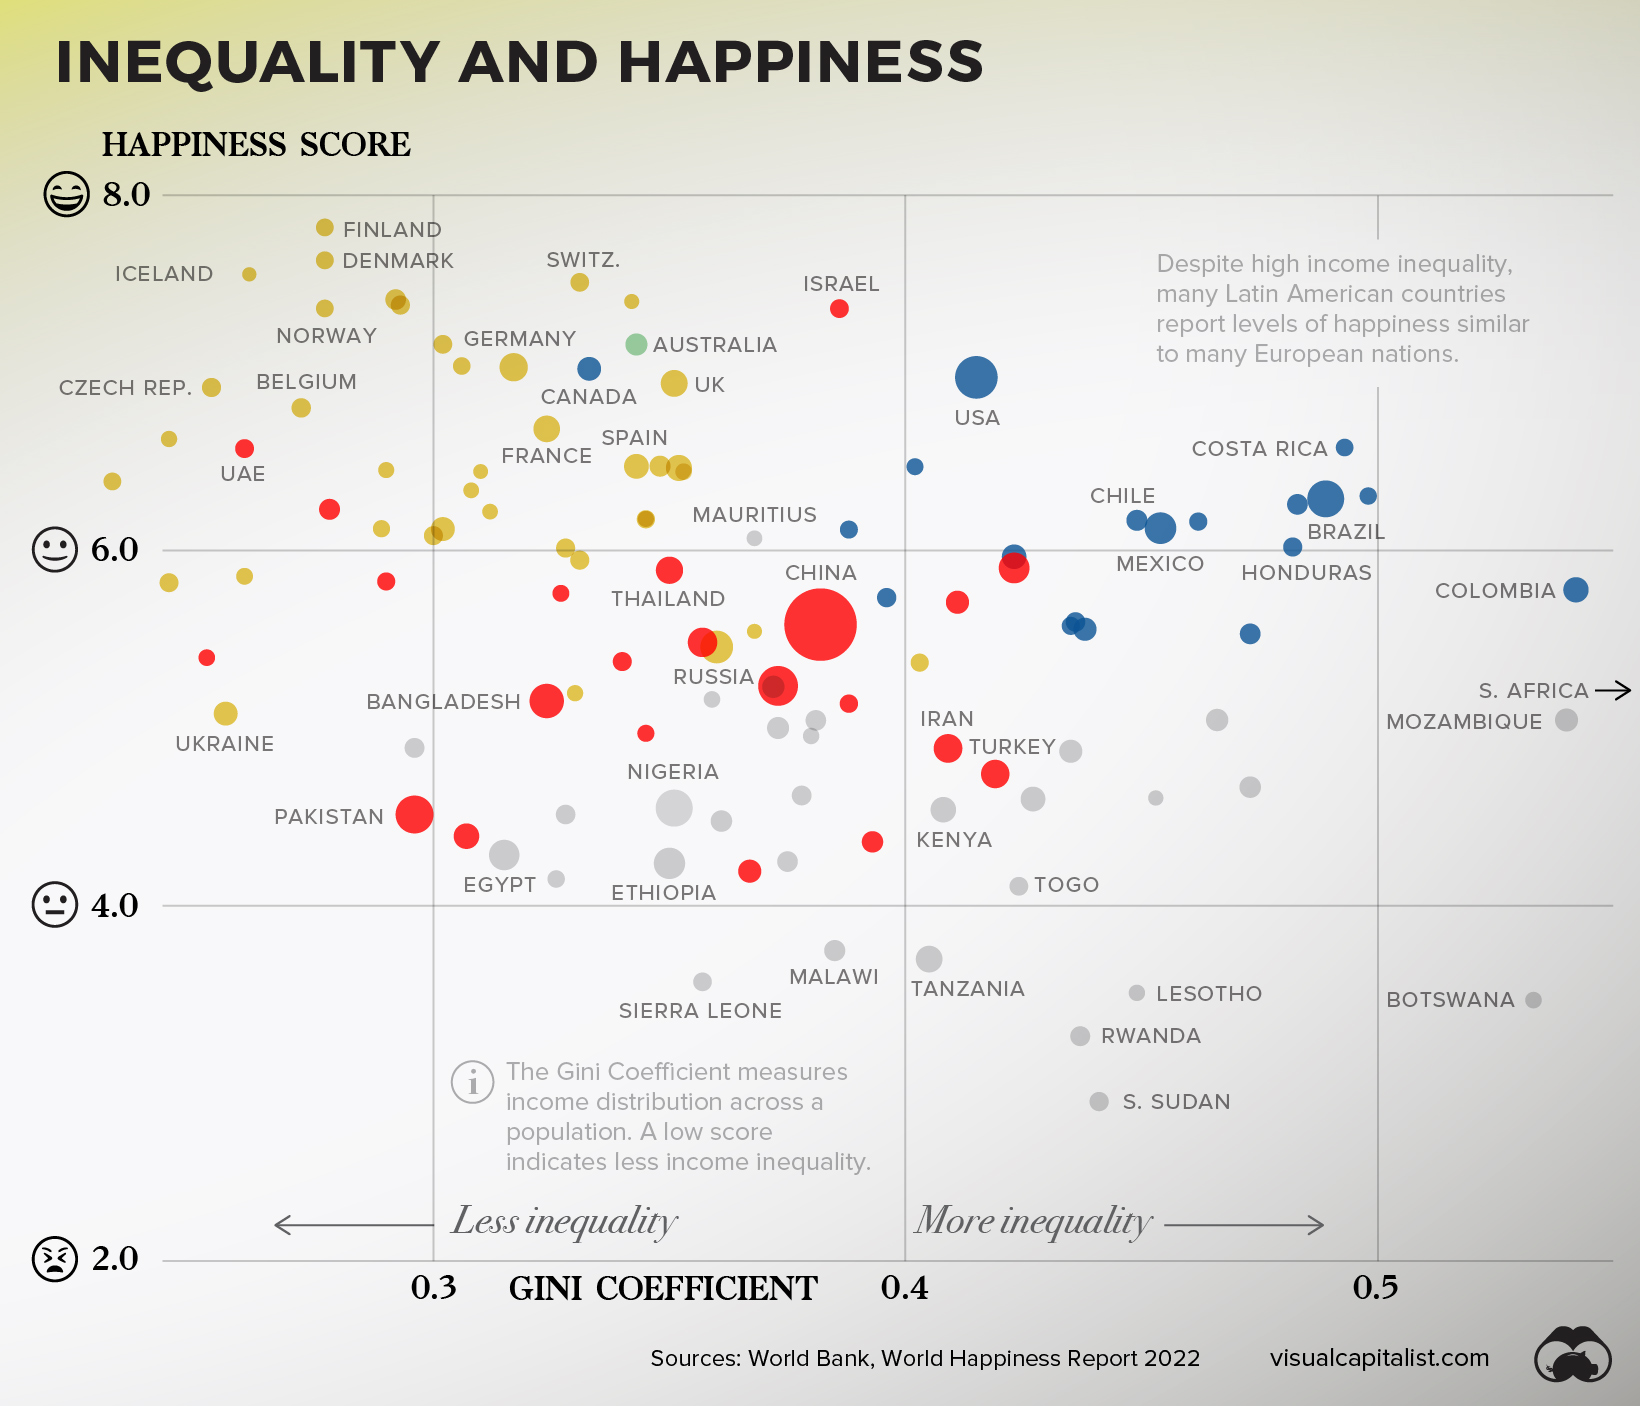 Data visualization showing the relationship between inequality and happiness around the world